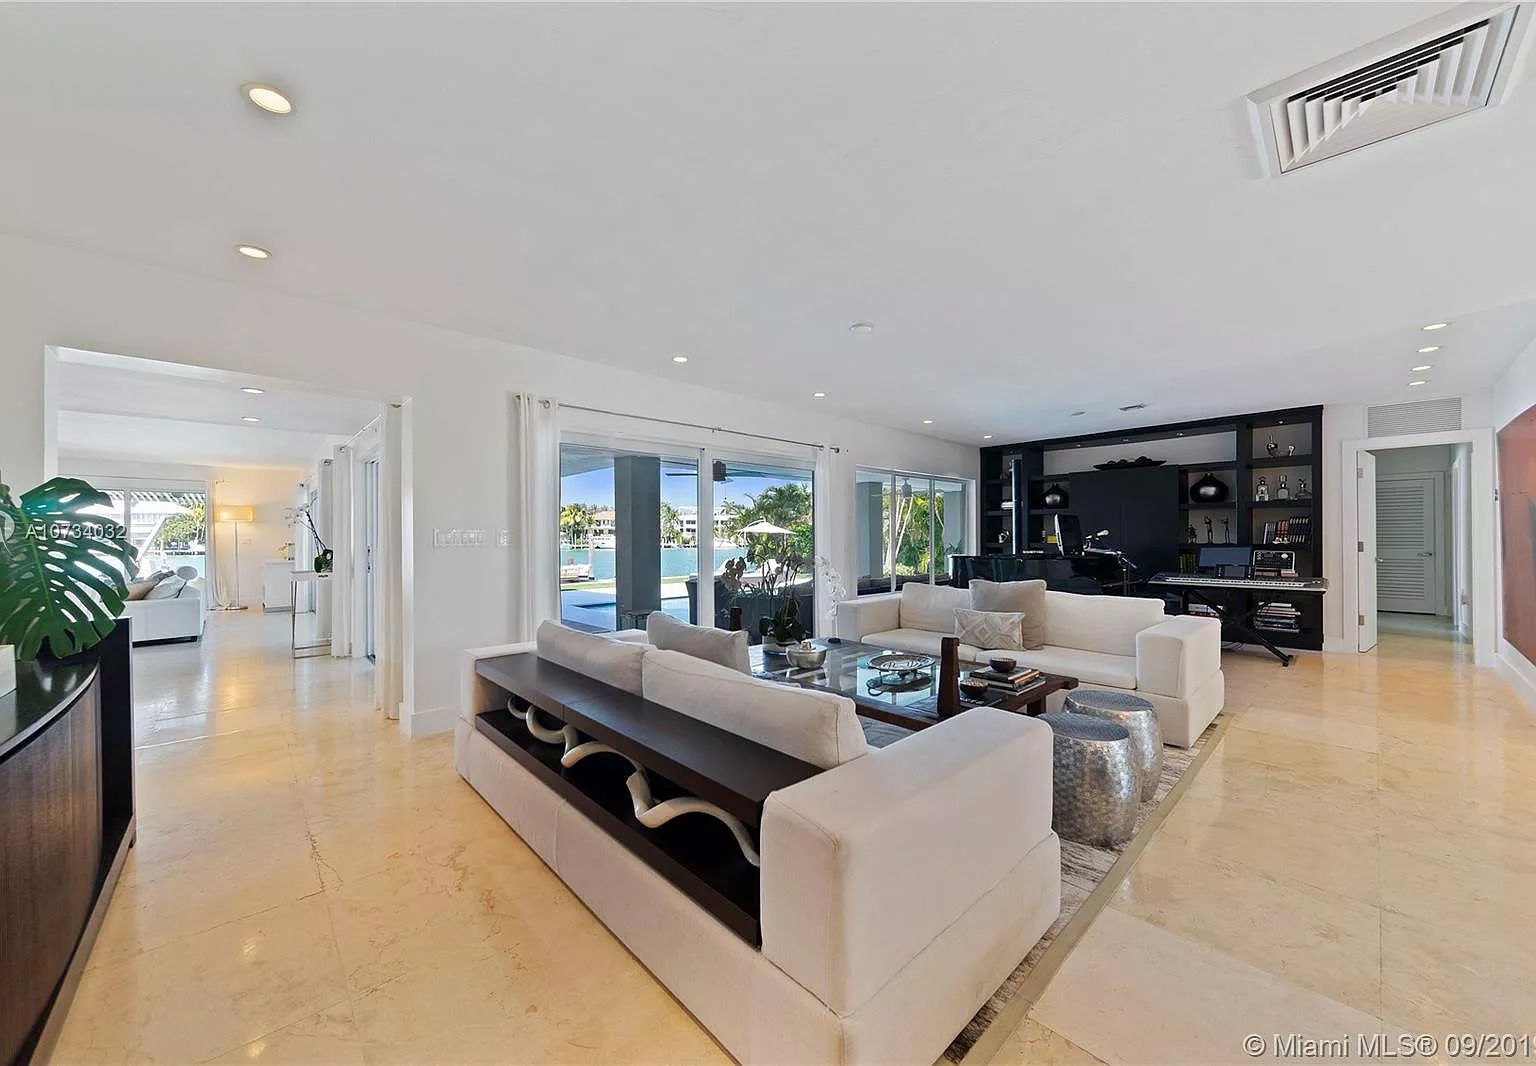 601 N Mashta Dr, Key Biscayne, FL 33149 - $7,350,000 home for sale, house images, photos and pics gallery